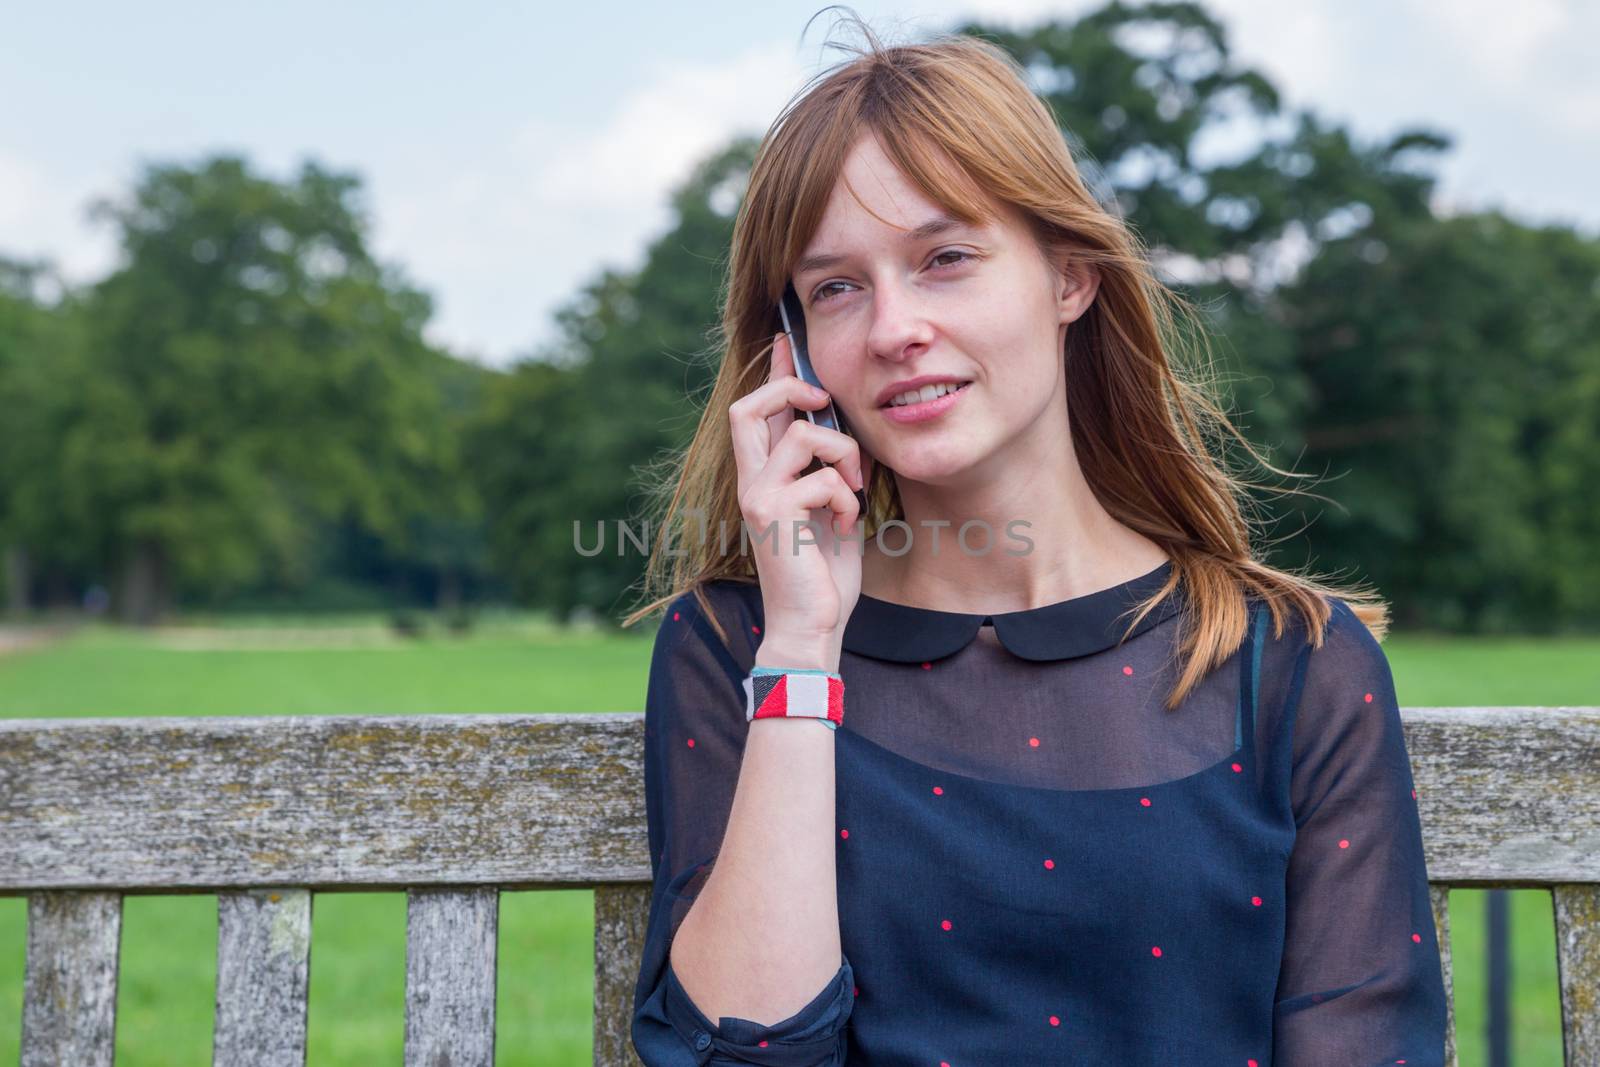 Caucasian teenage girl with red hair phoning with mobile phone in nature